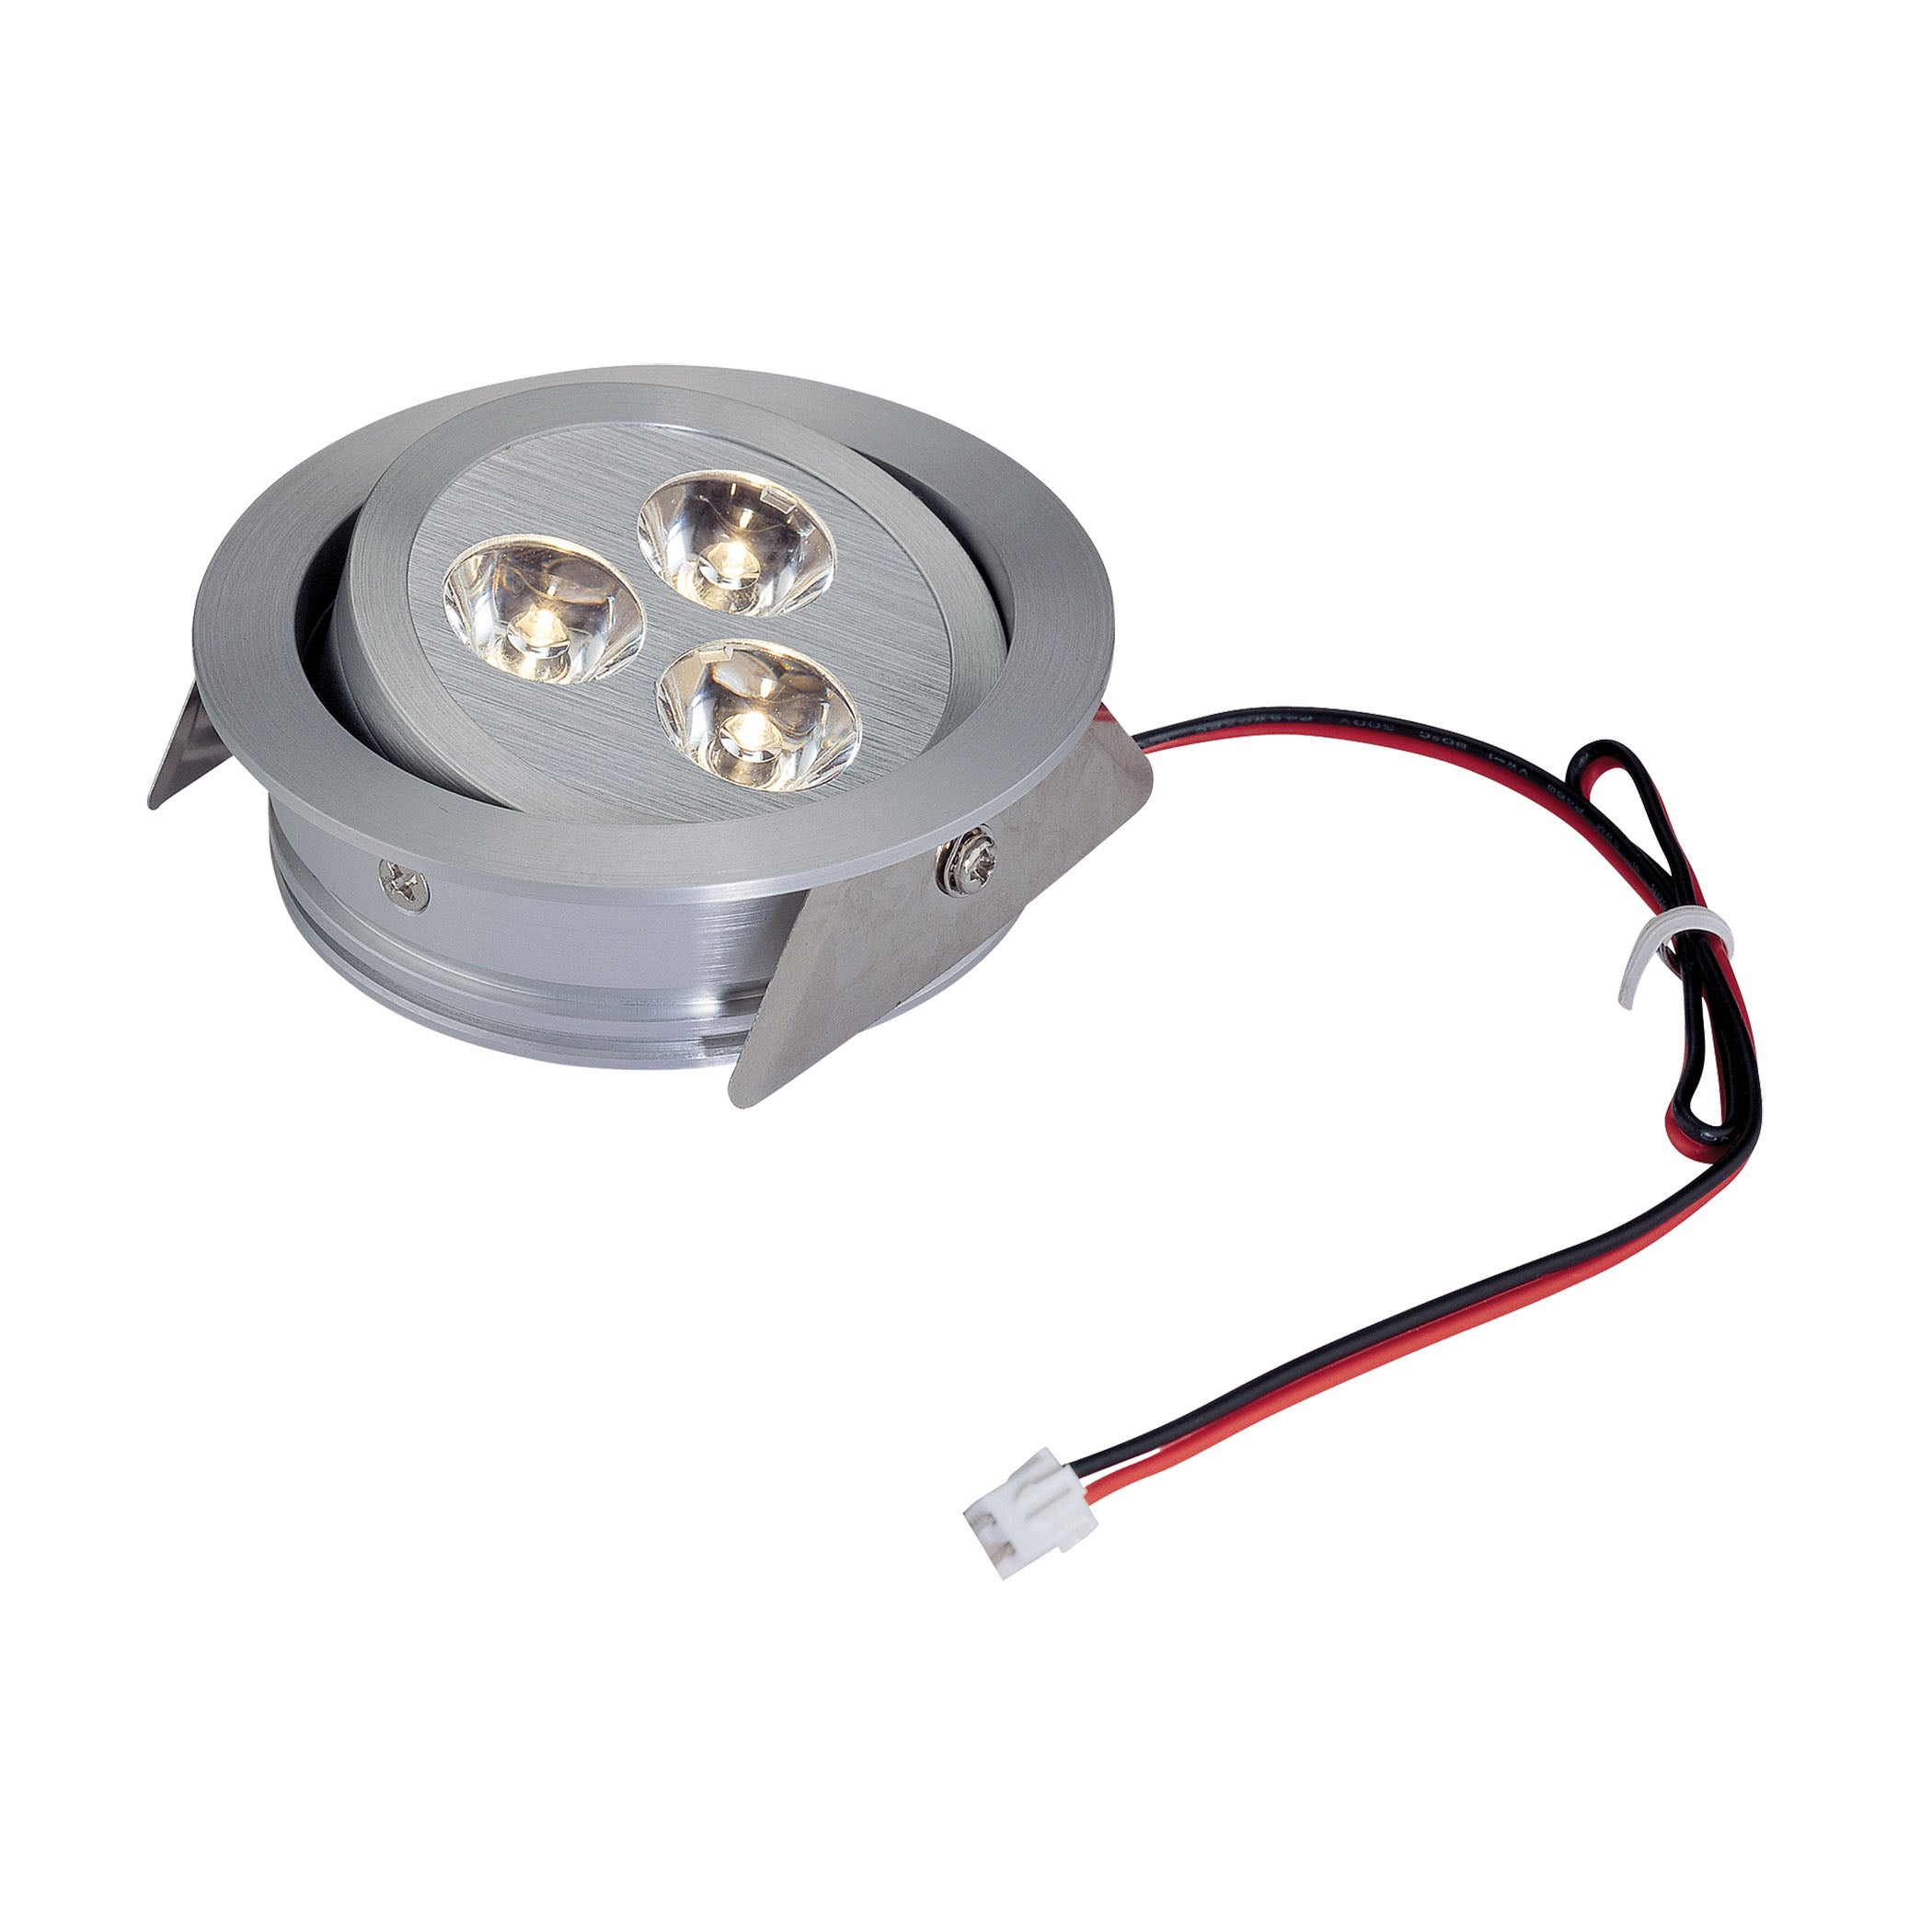 ELK Lighting WLE123C32K-0-98 Tiro 3-Light Directional Downlight in Brushed Aluminum with Clear Acrylic Diffuser - Integrated LED